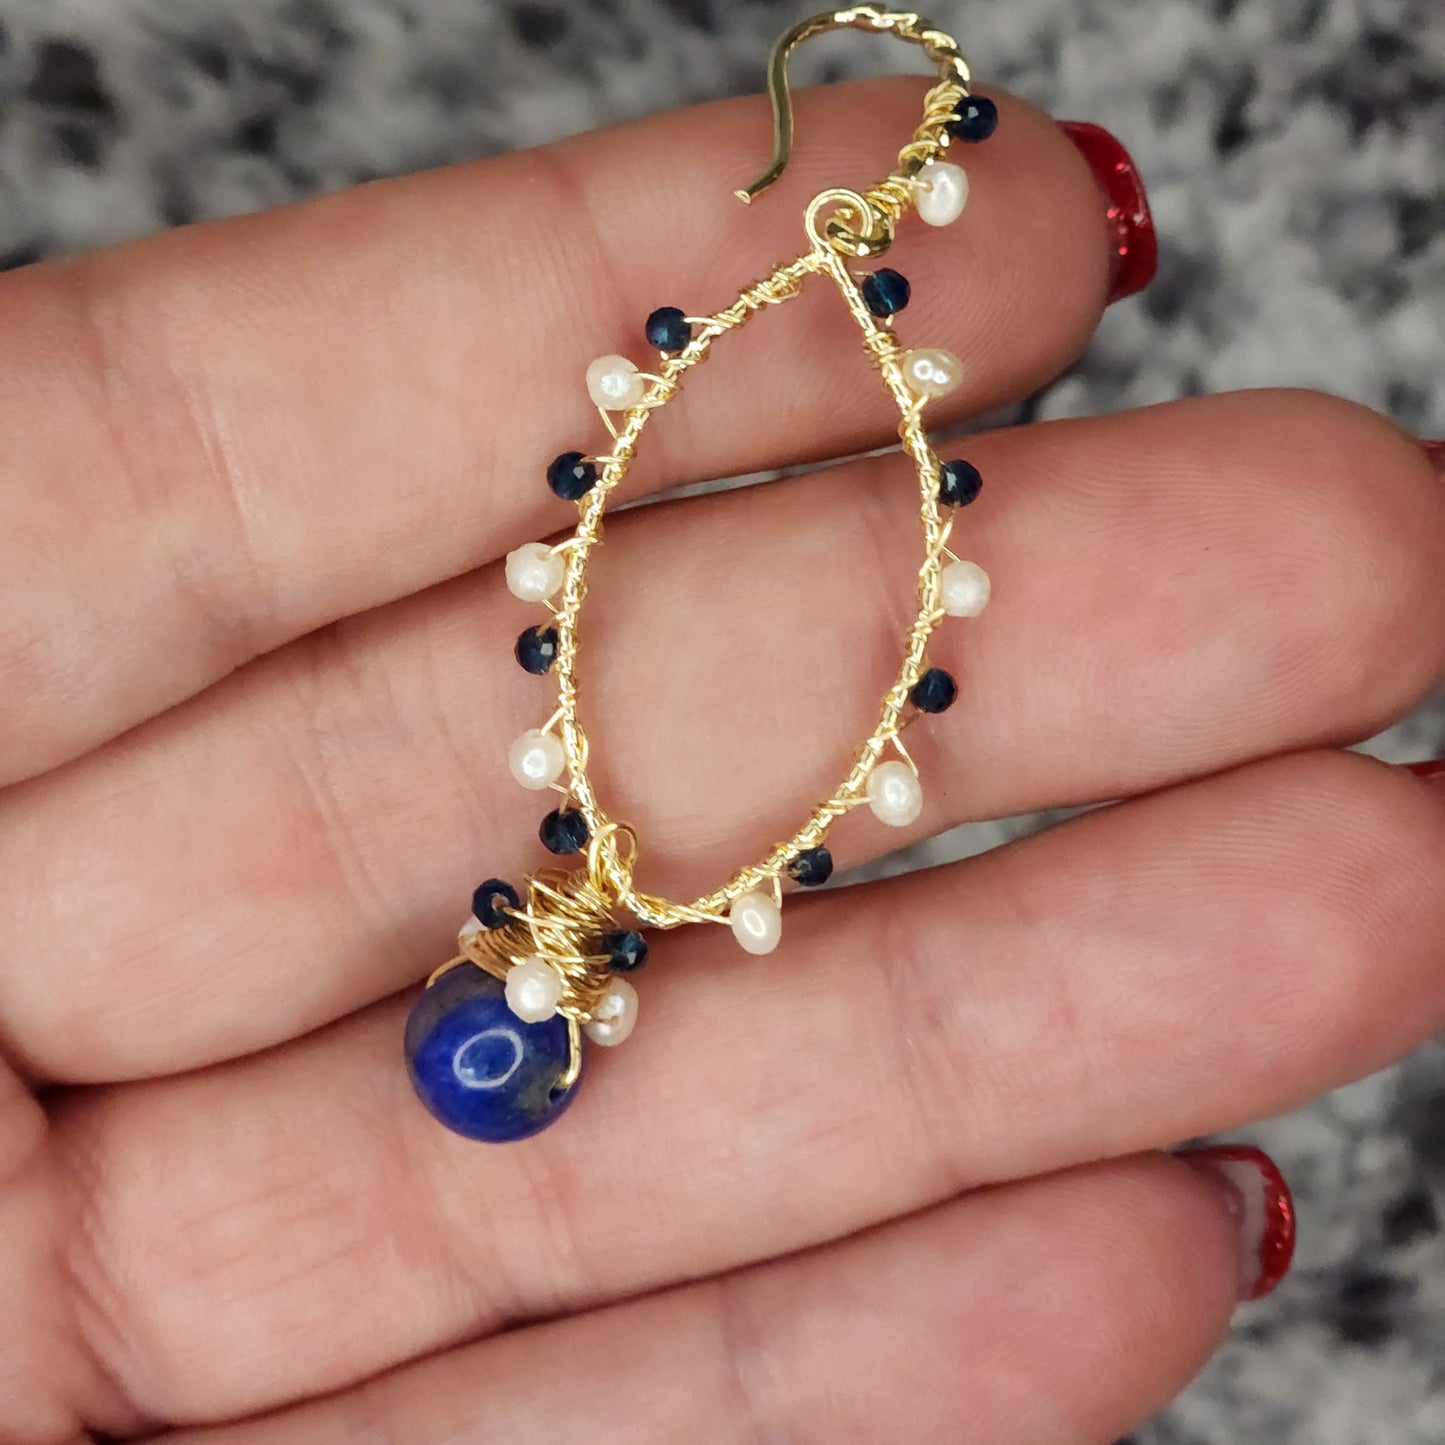 Lapis and Freshwater Pearl Earrings